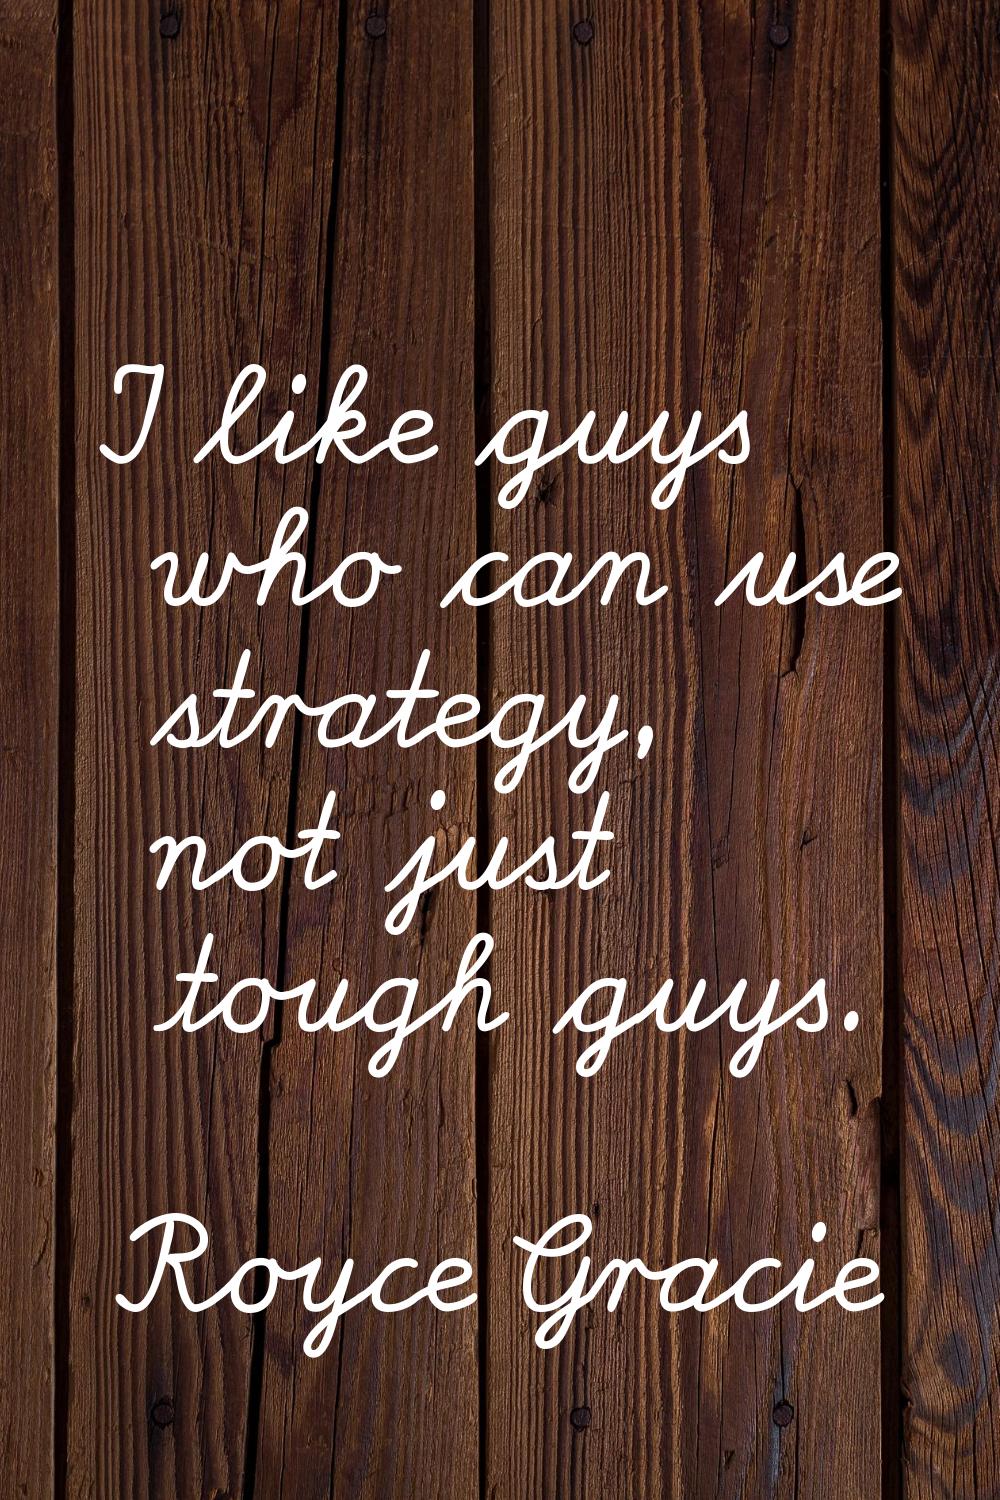 I like guys who can use strategy, not just tough guys.